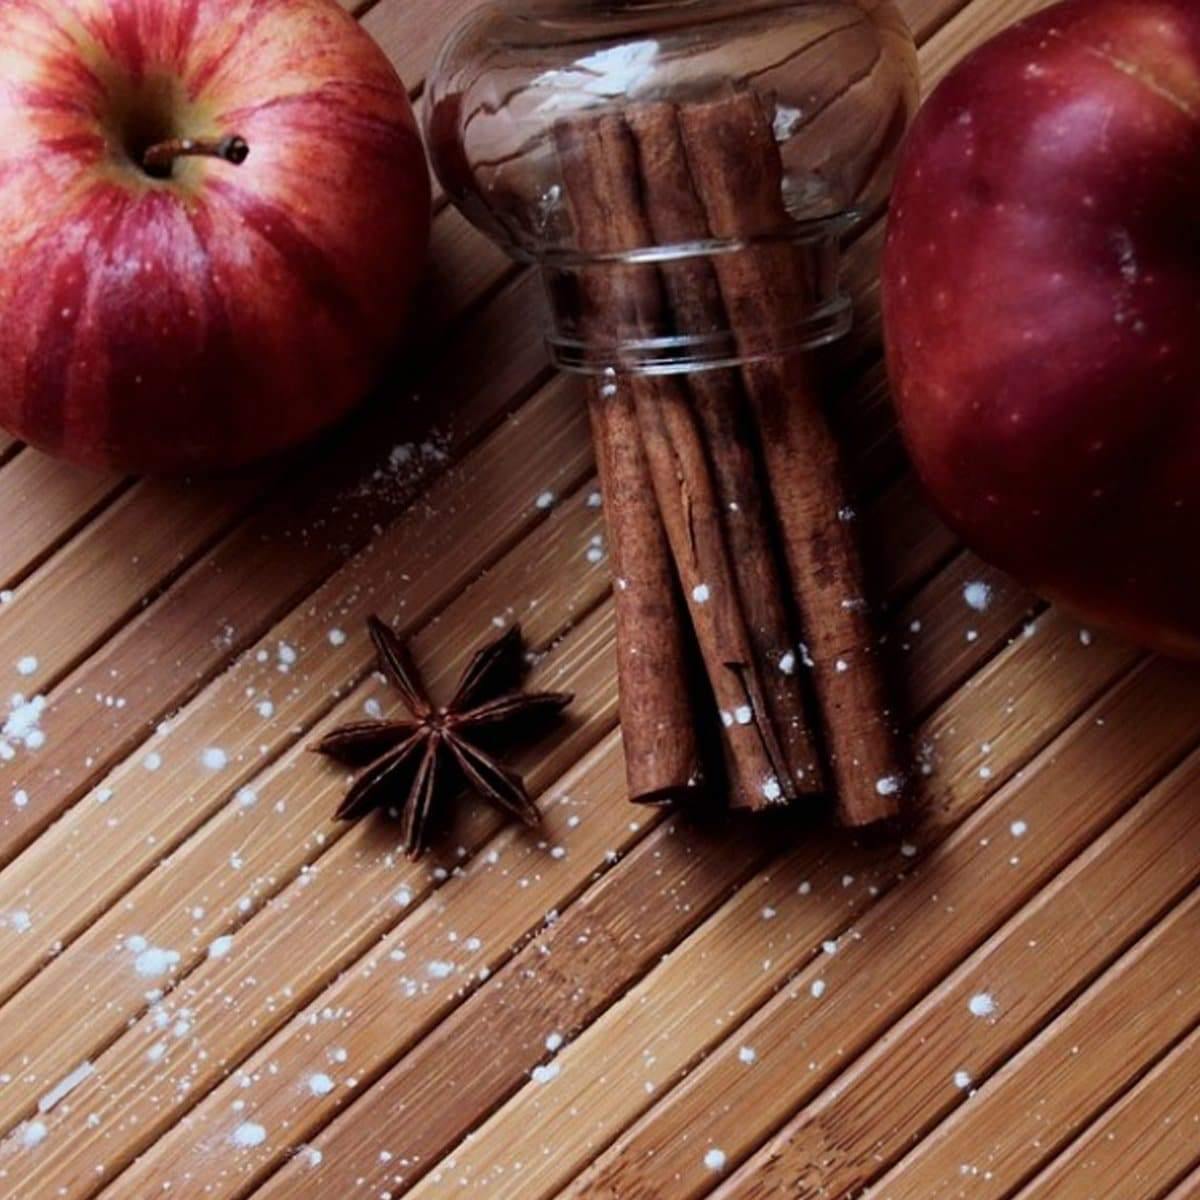 Apple & Cinnamon - Wax Melt Clamshell – The Stirling Candle Company